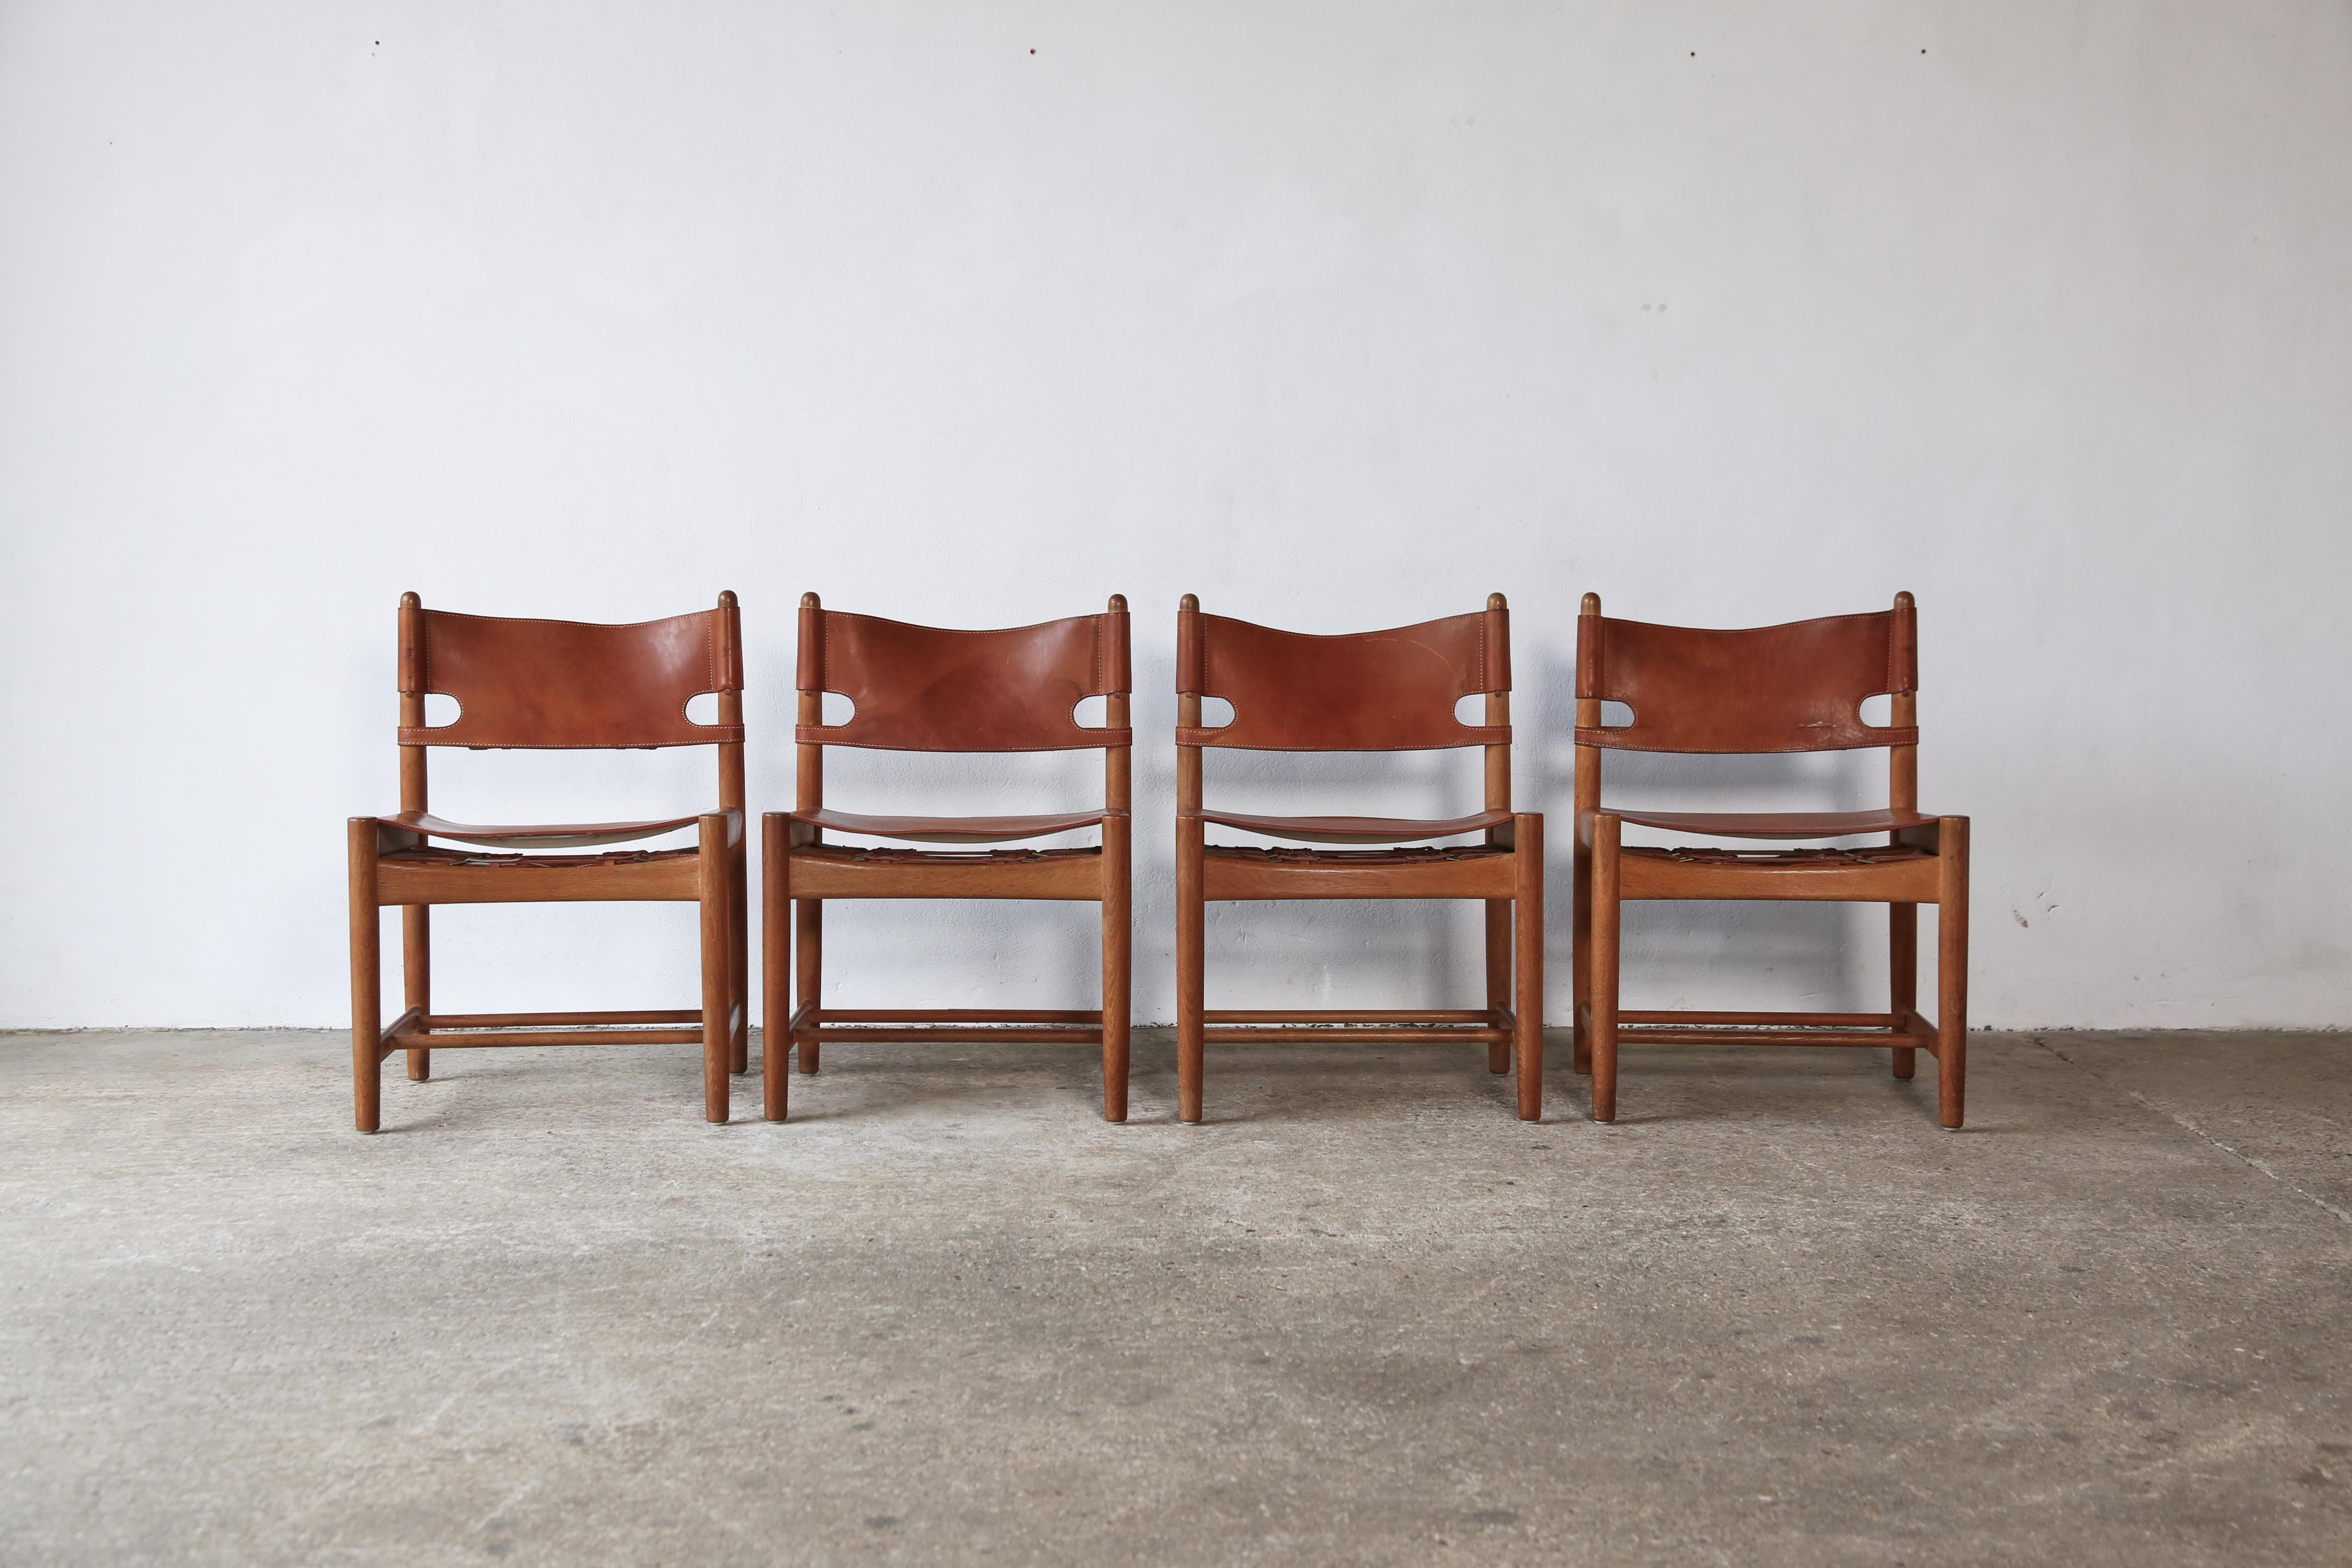 A set of four Børge Mogensen dining chairs model no. 3251 for Fredericia Furniture, with saddle leather on an oak frame, in original condition with a wonderful age and patina.  Fast shipping worldwide.   Please contact us for a competitive shipping